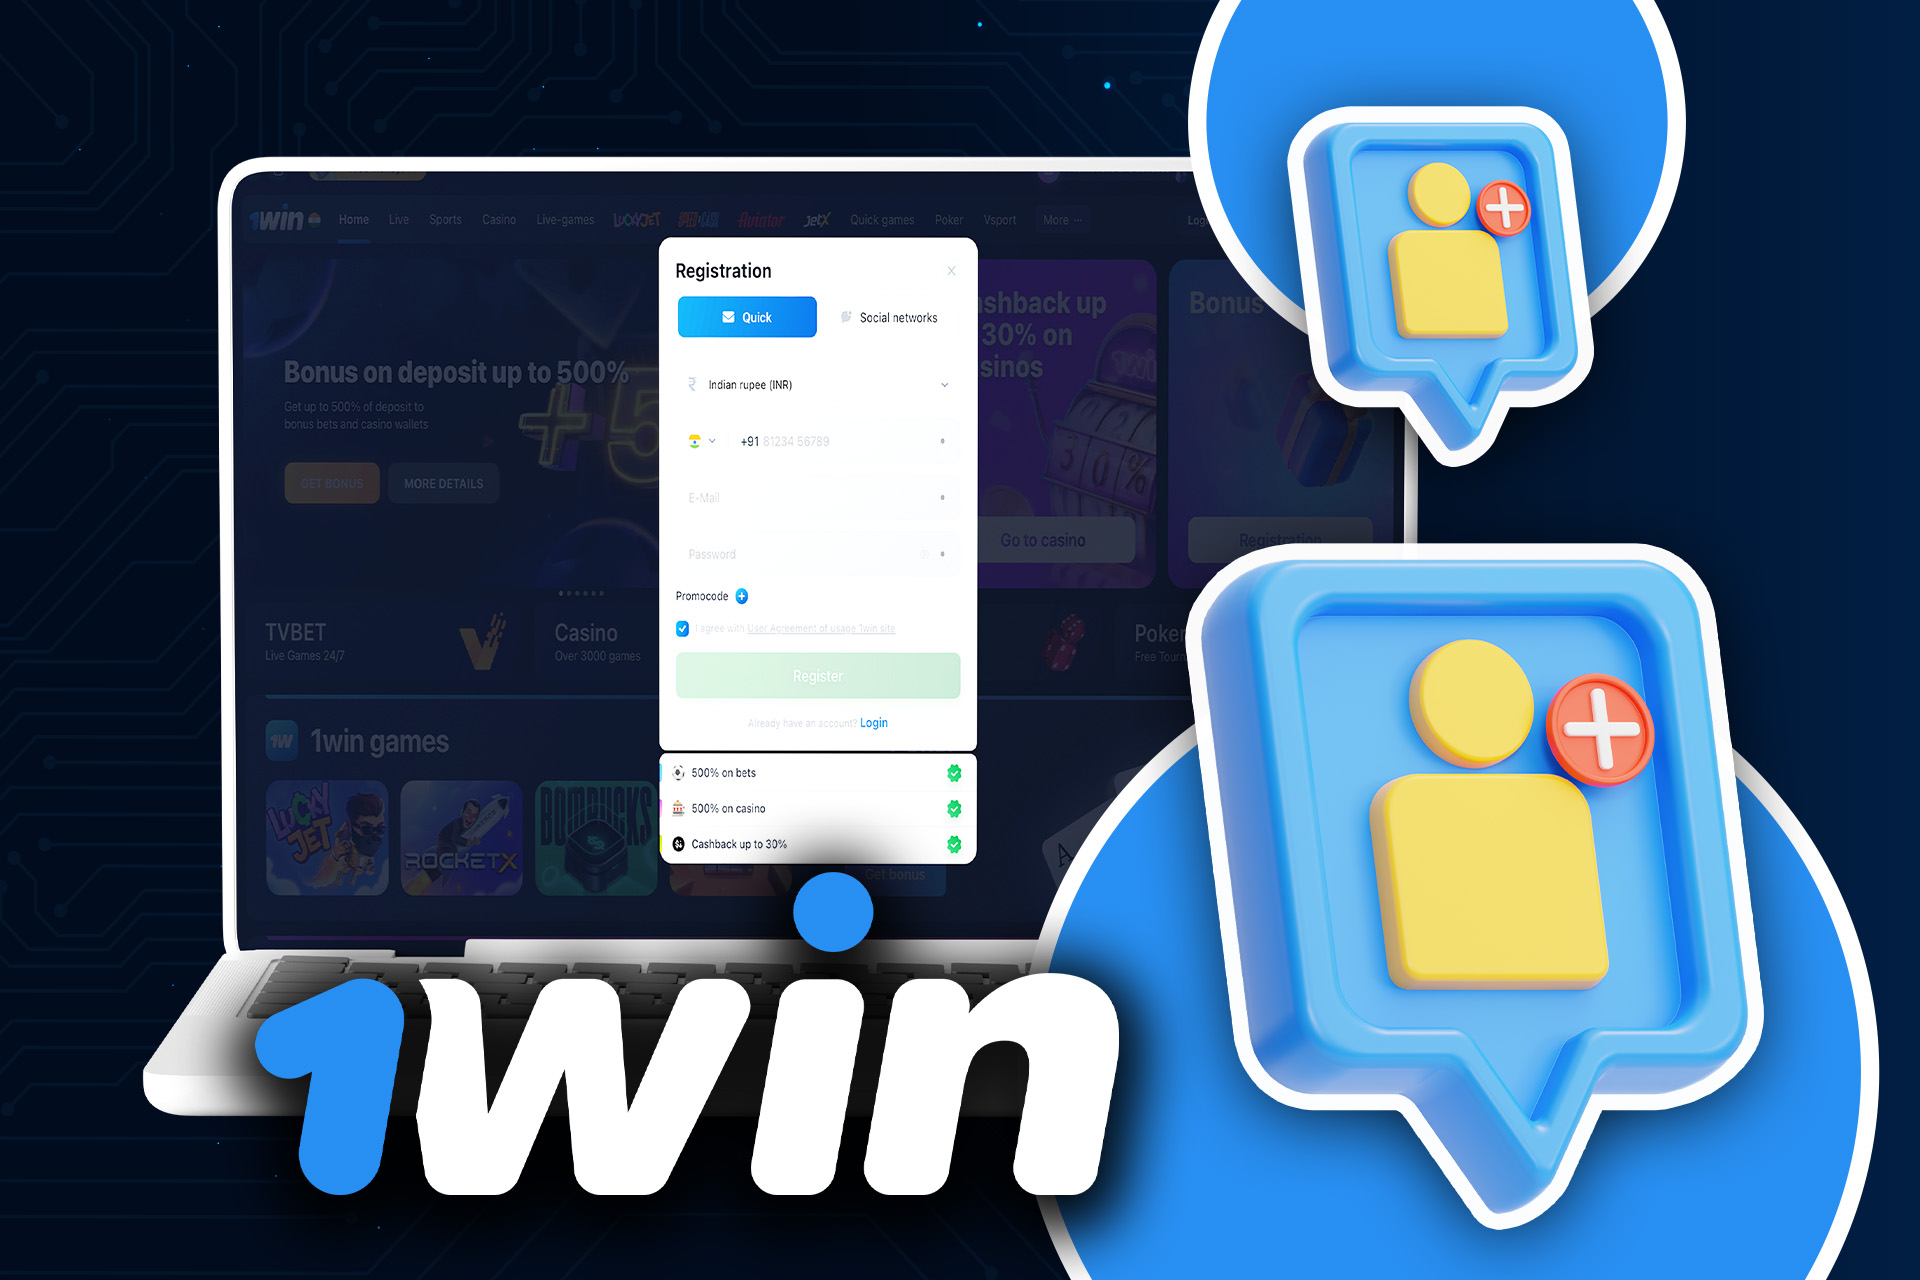 Create your account on the 1win website.